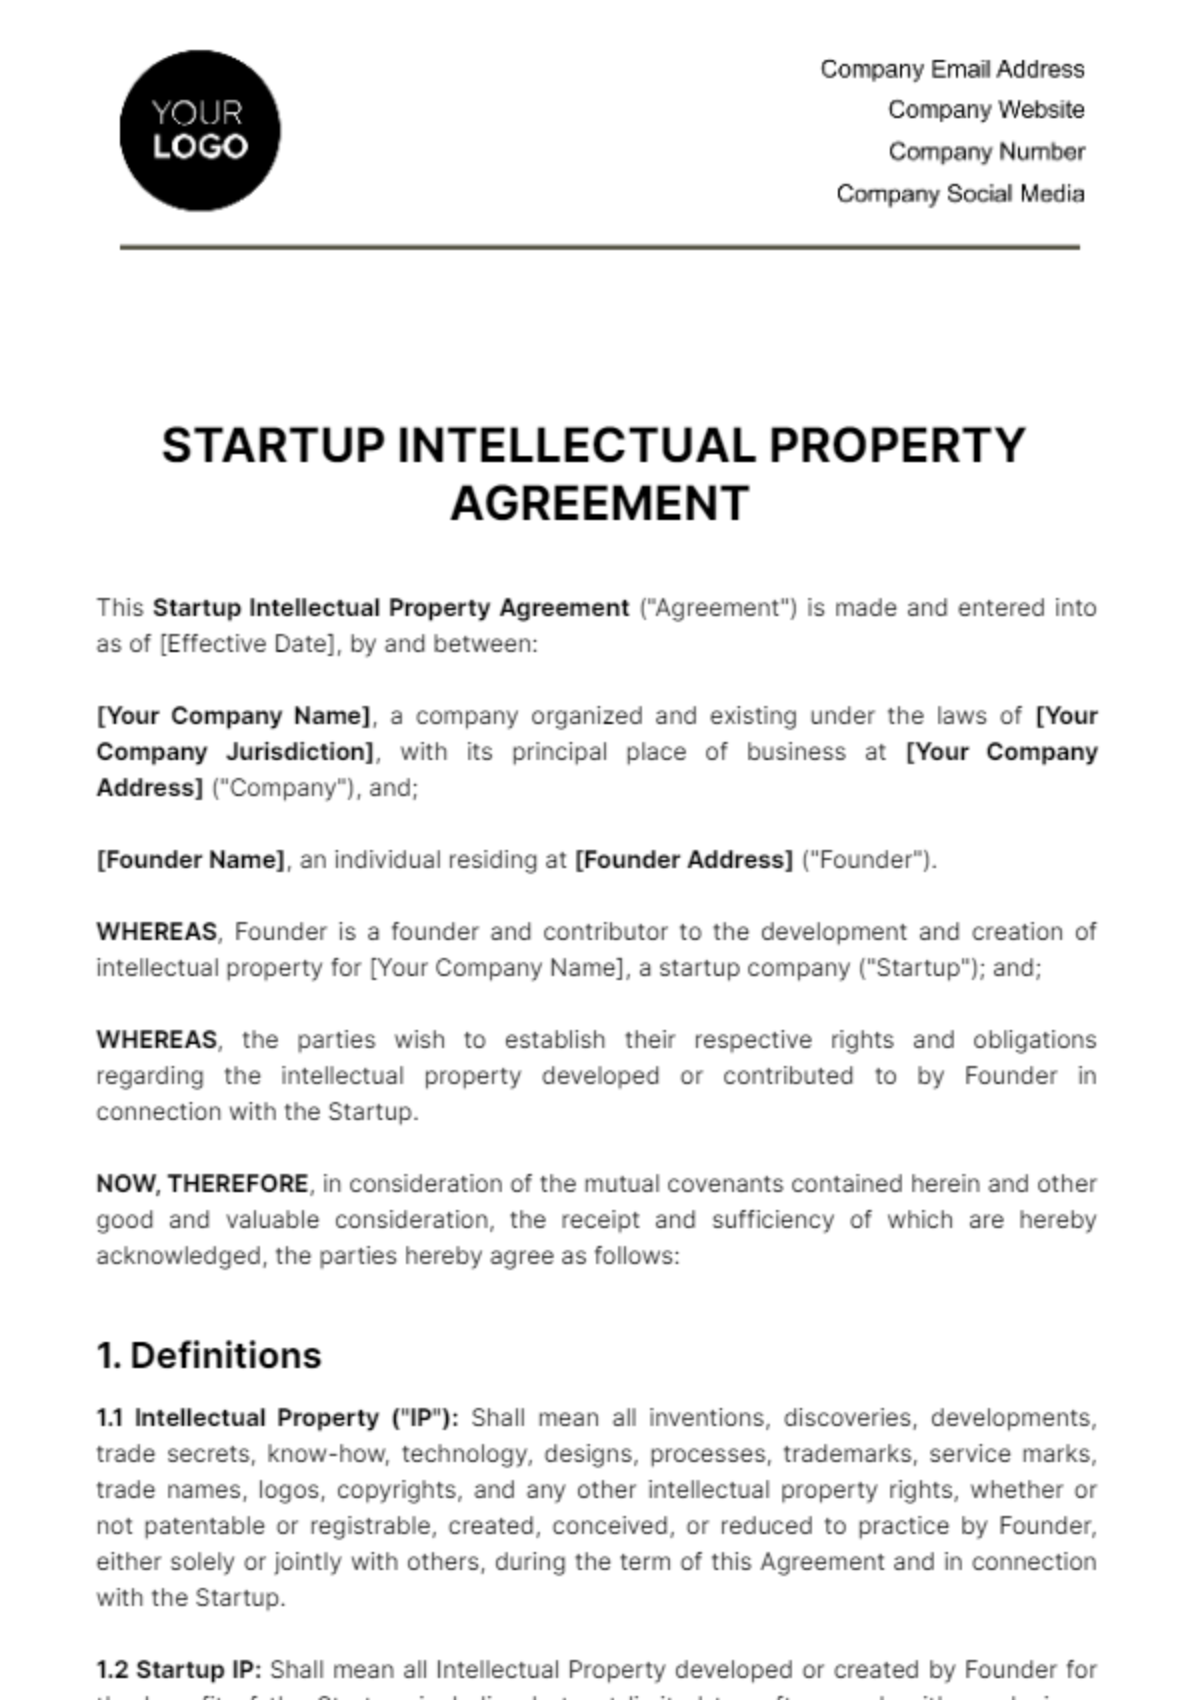 Startup Intellectual Property Agreement Template